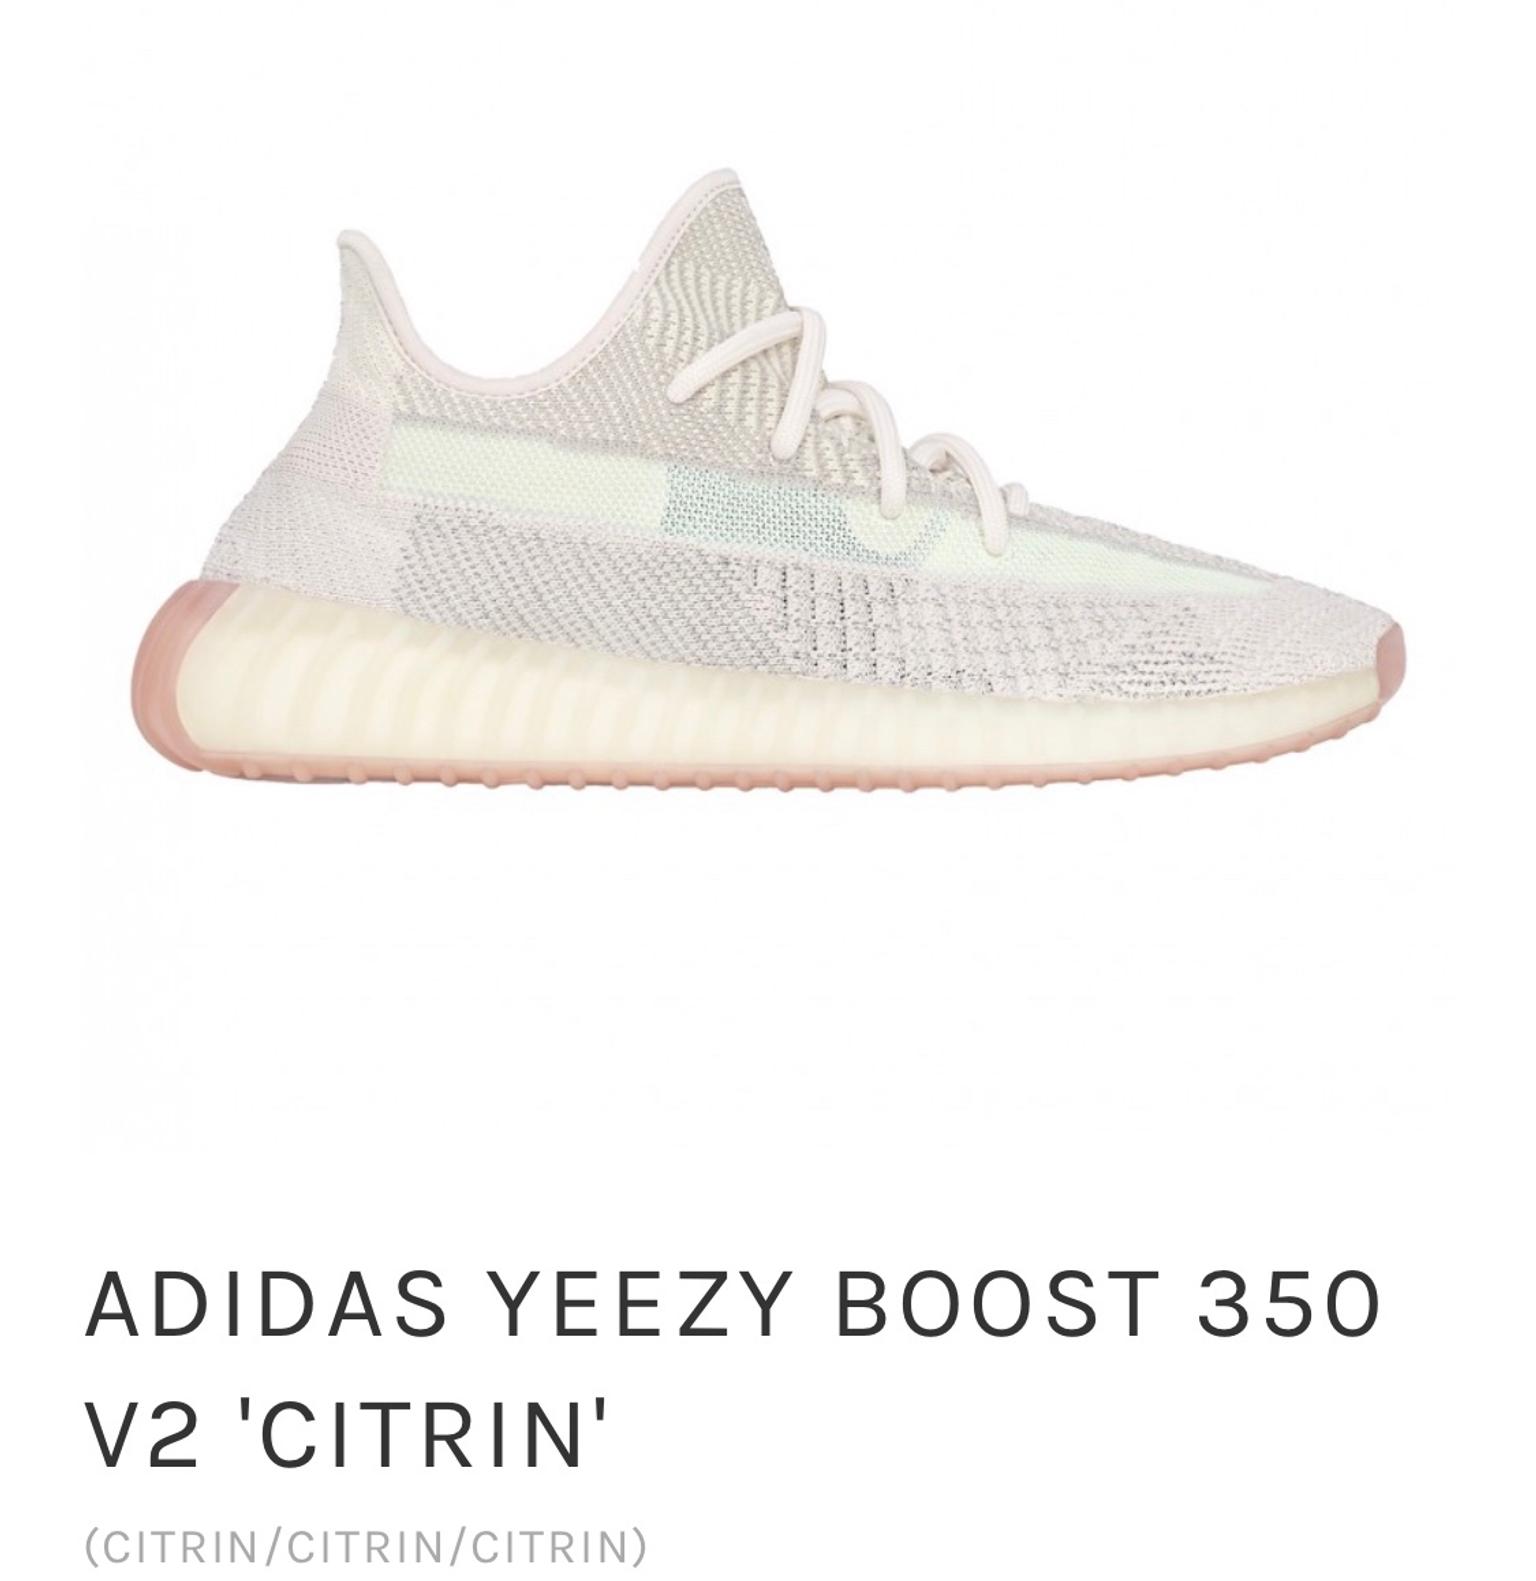 THE NEW YEEZY BOOST 350 v2 CITRIN IS Facebook